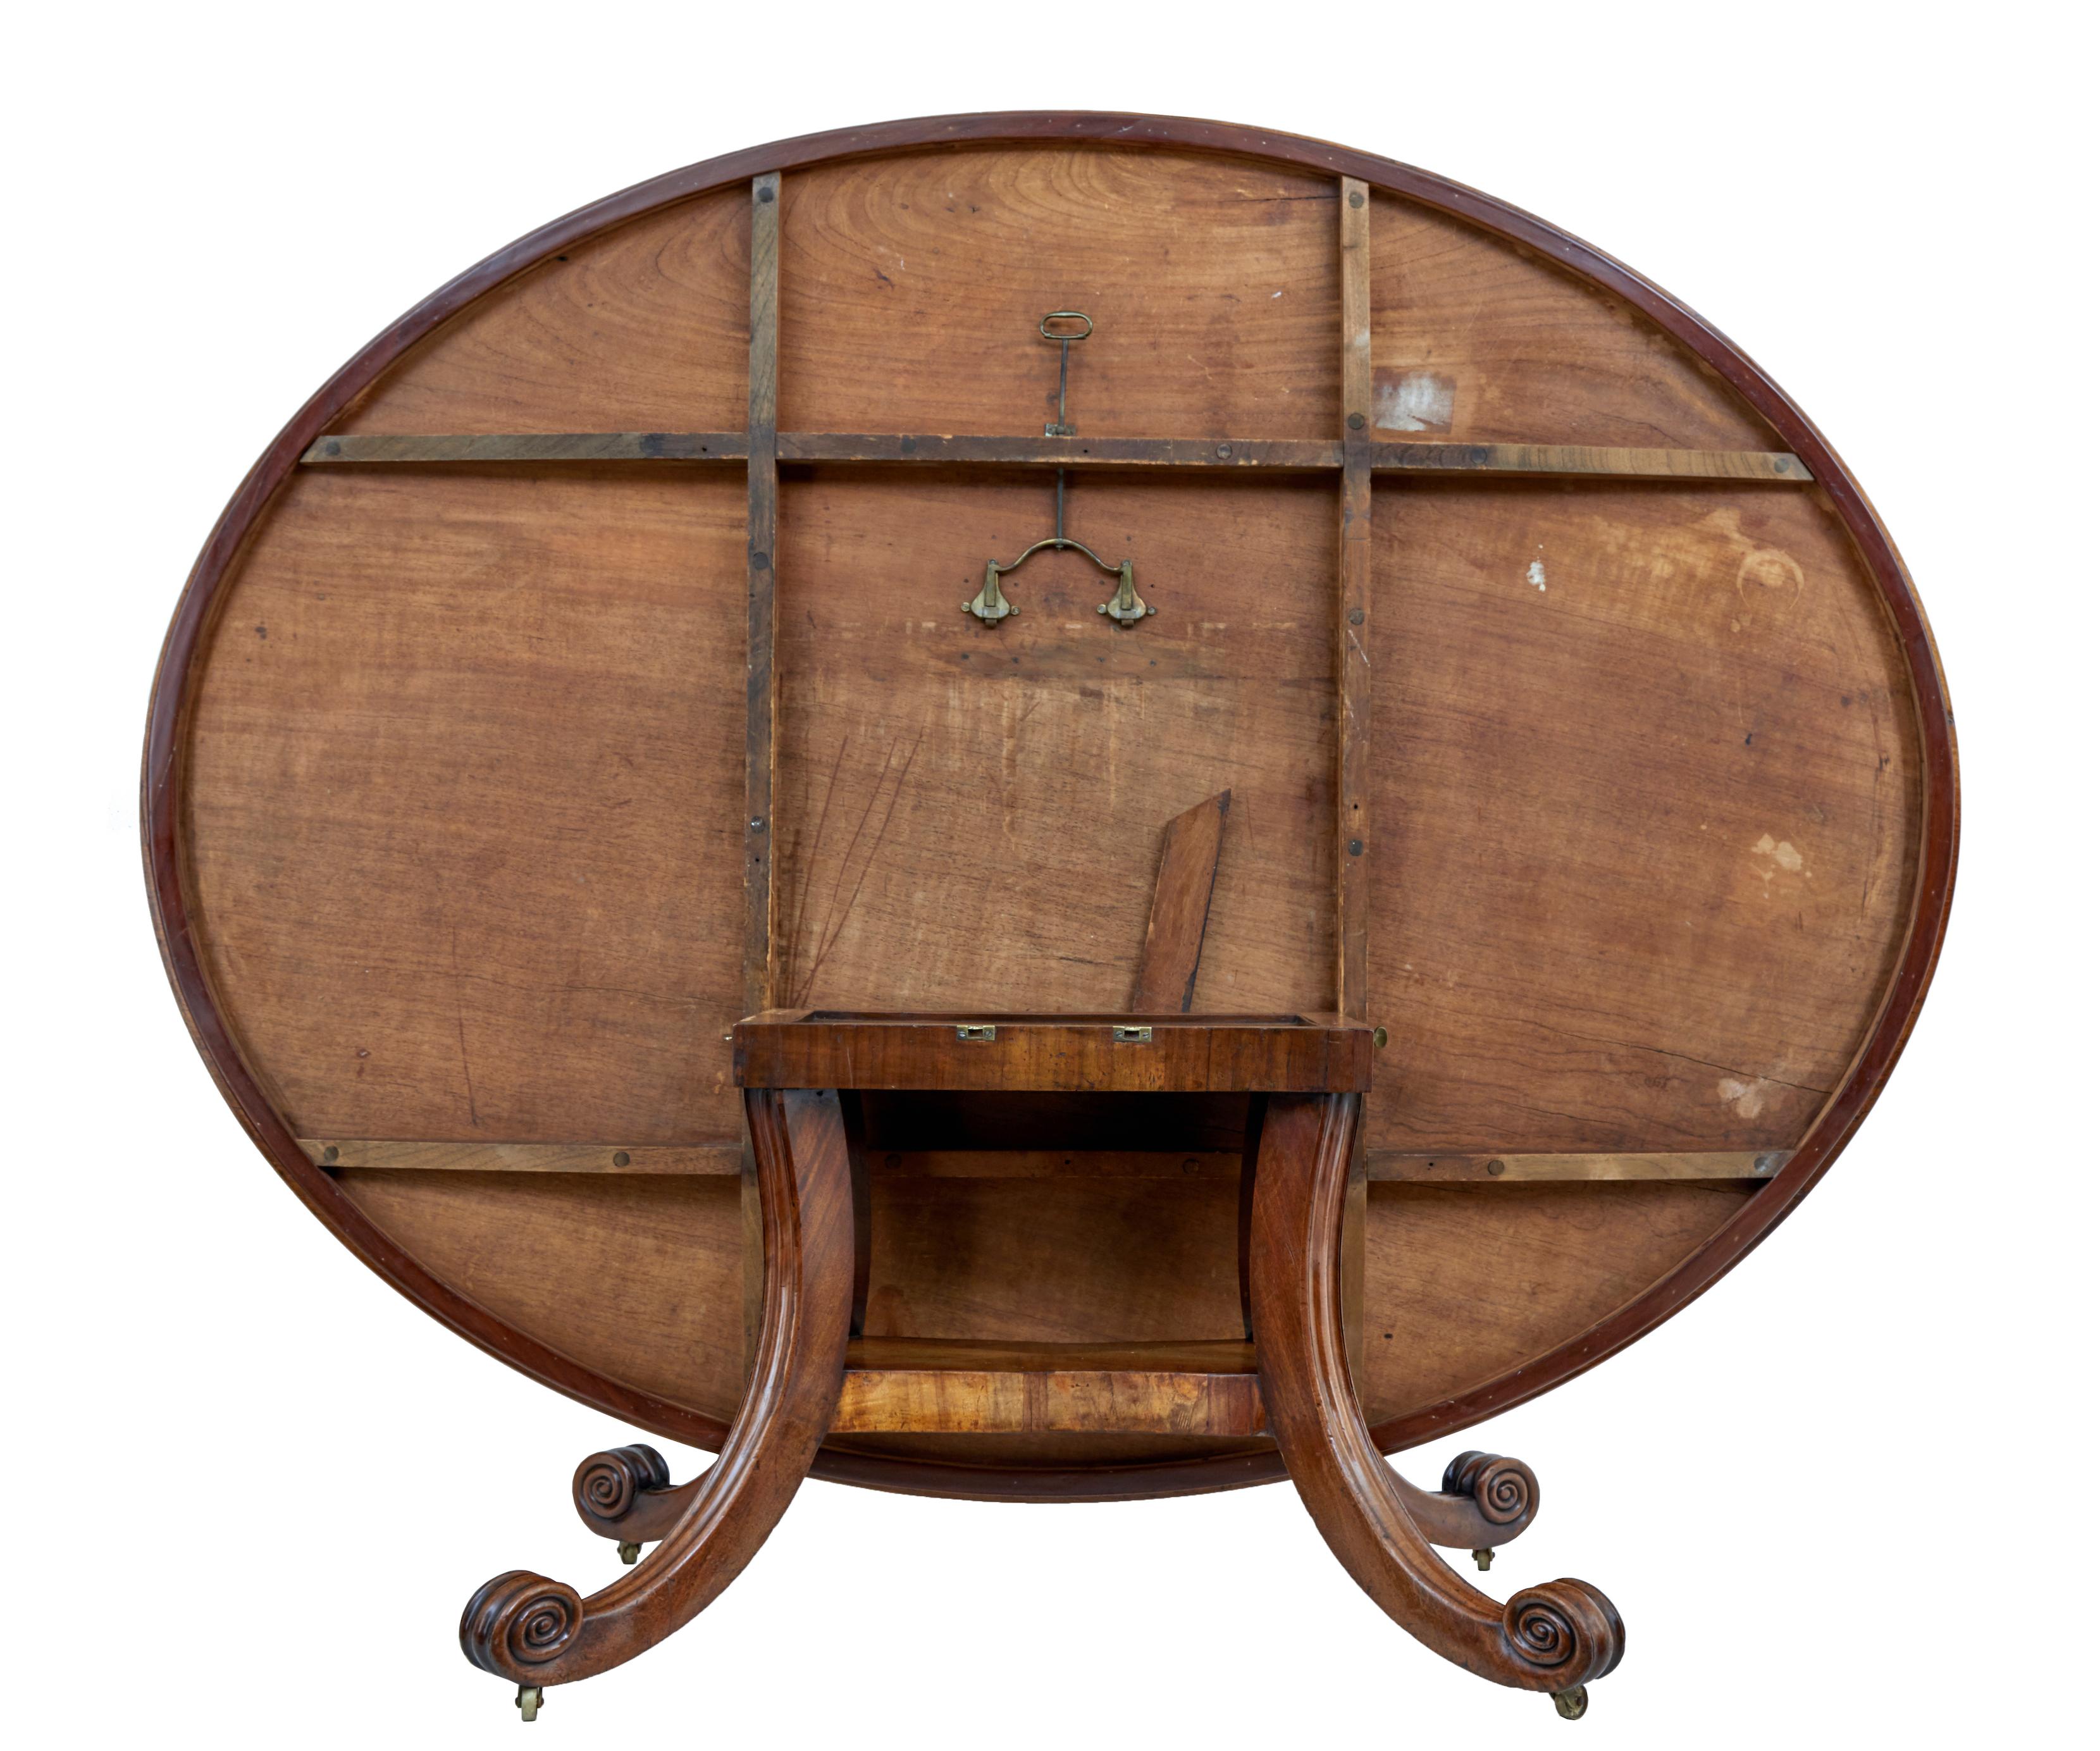 Hand-Crafted Rare George IV Mahogany Tilt Top Breakfast Table of Enormous Proportions